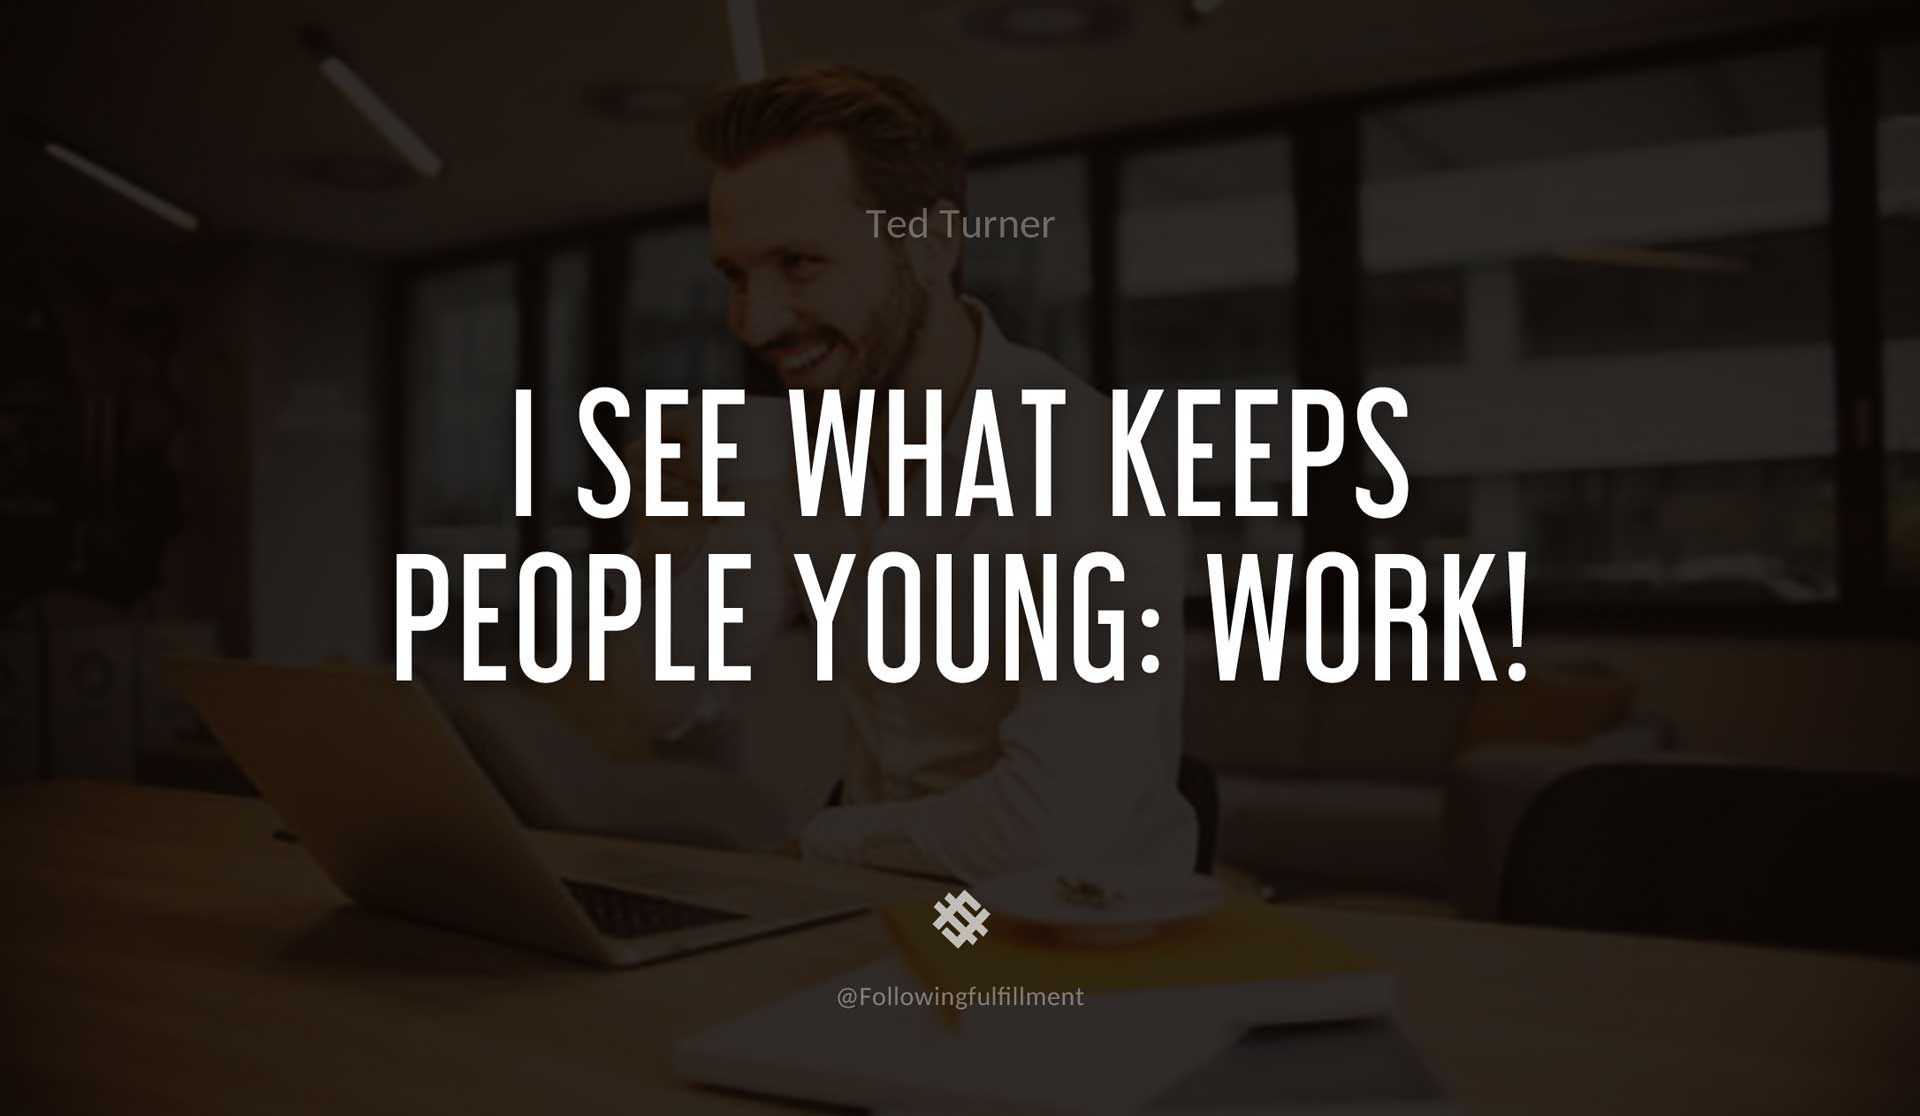 I-see-what-keeps-people-young--work!-TED-TURNER-Quote.jpg